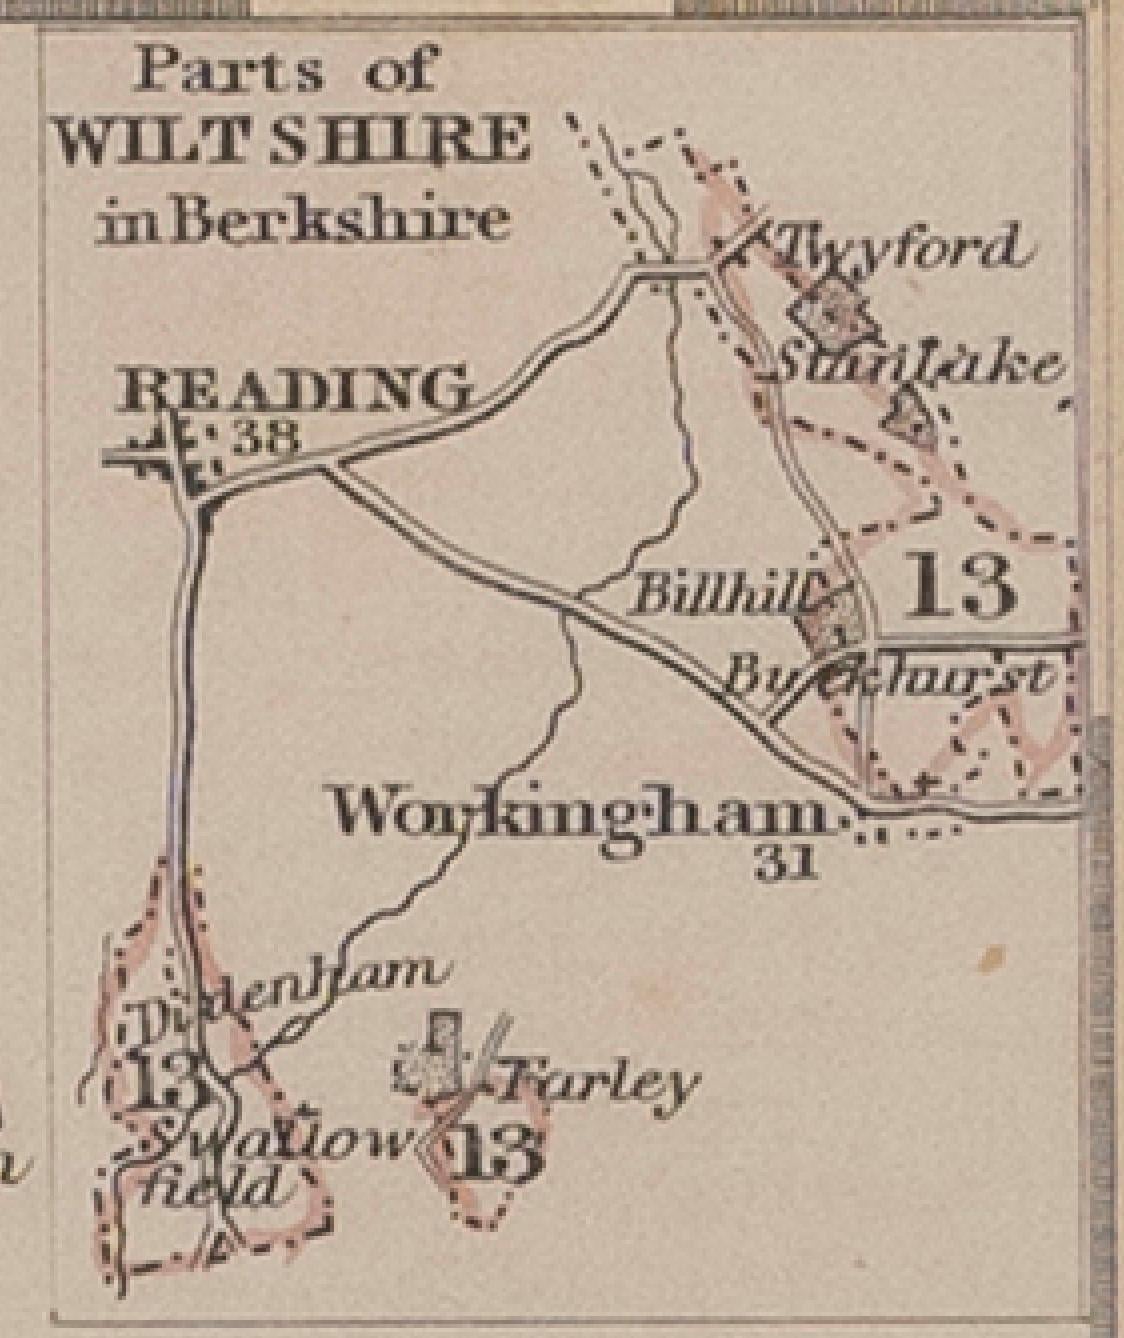 map of wiltshire